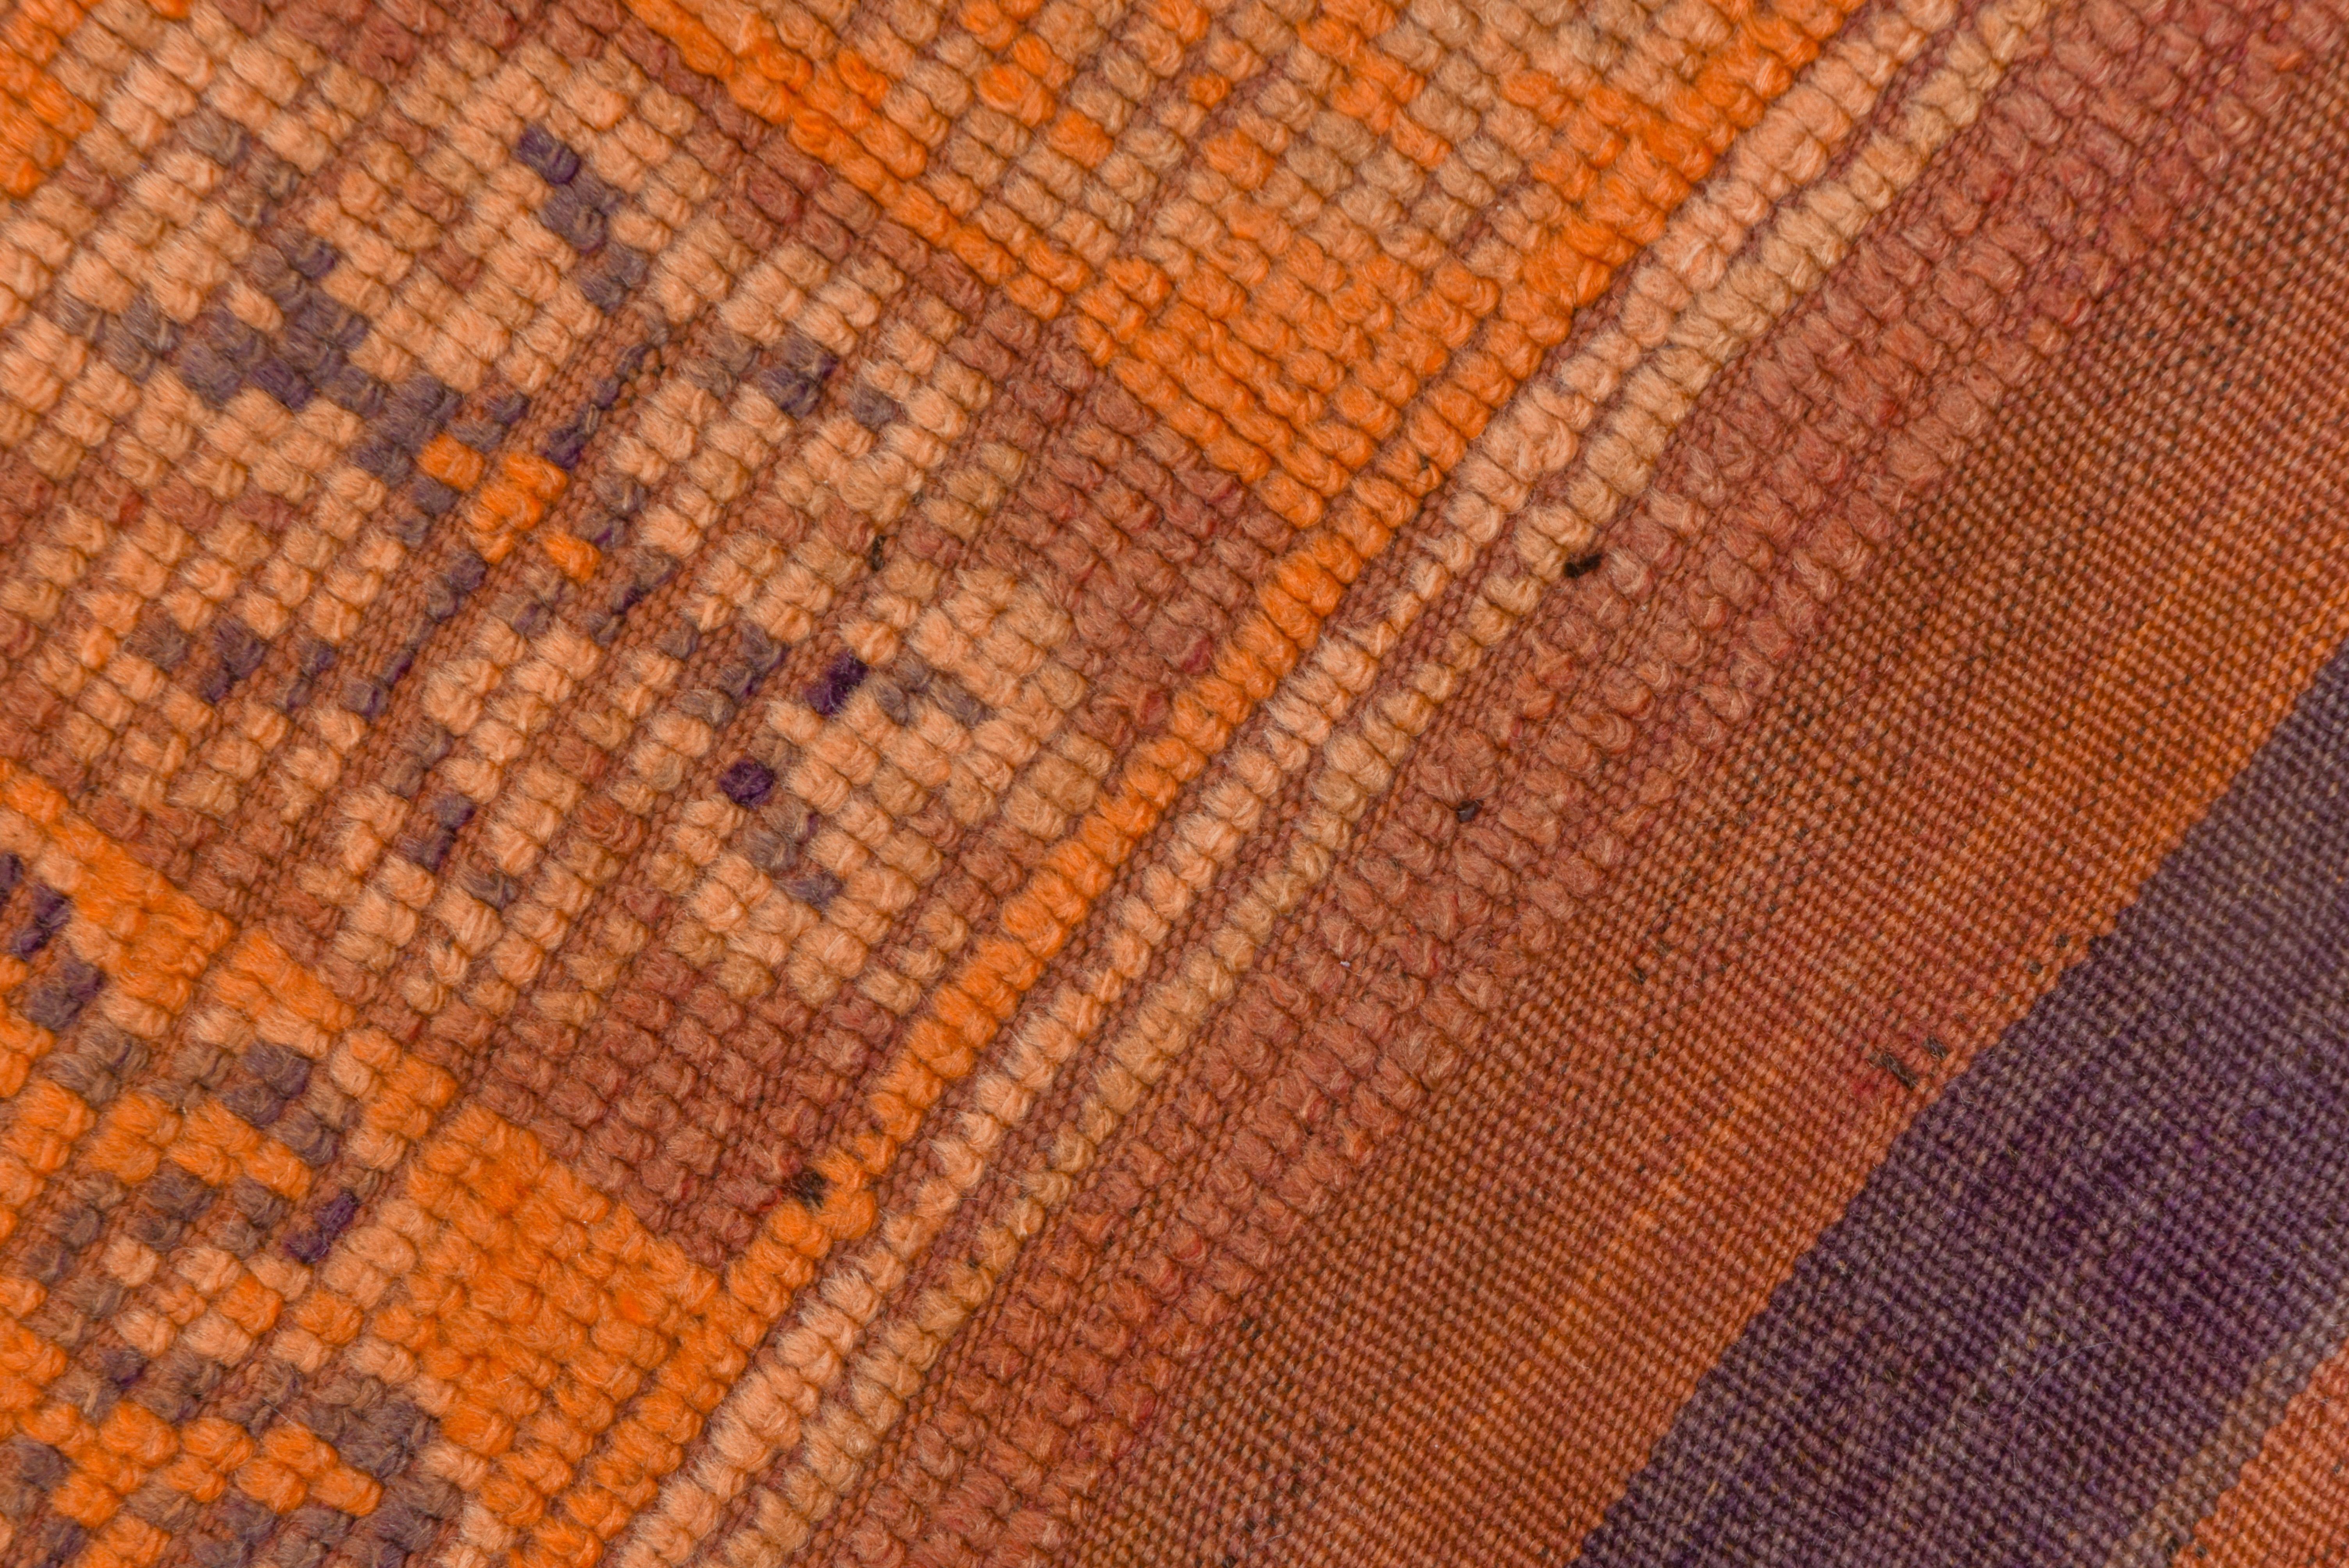 Vintage Berber Orange Moroccan Rug, Gallery Rug, Kilim Woven Ends In Good Condition For Sale In New York, NY